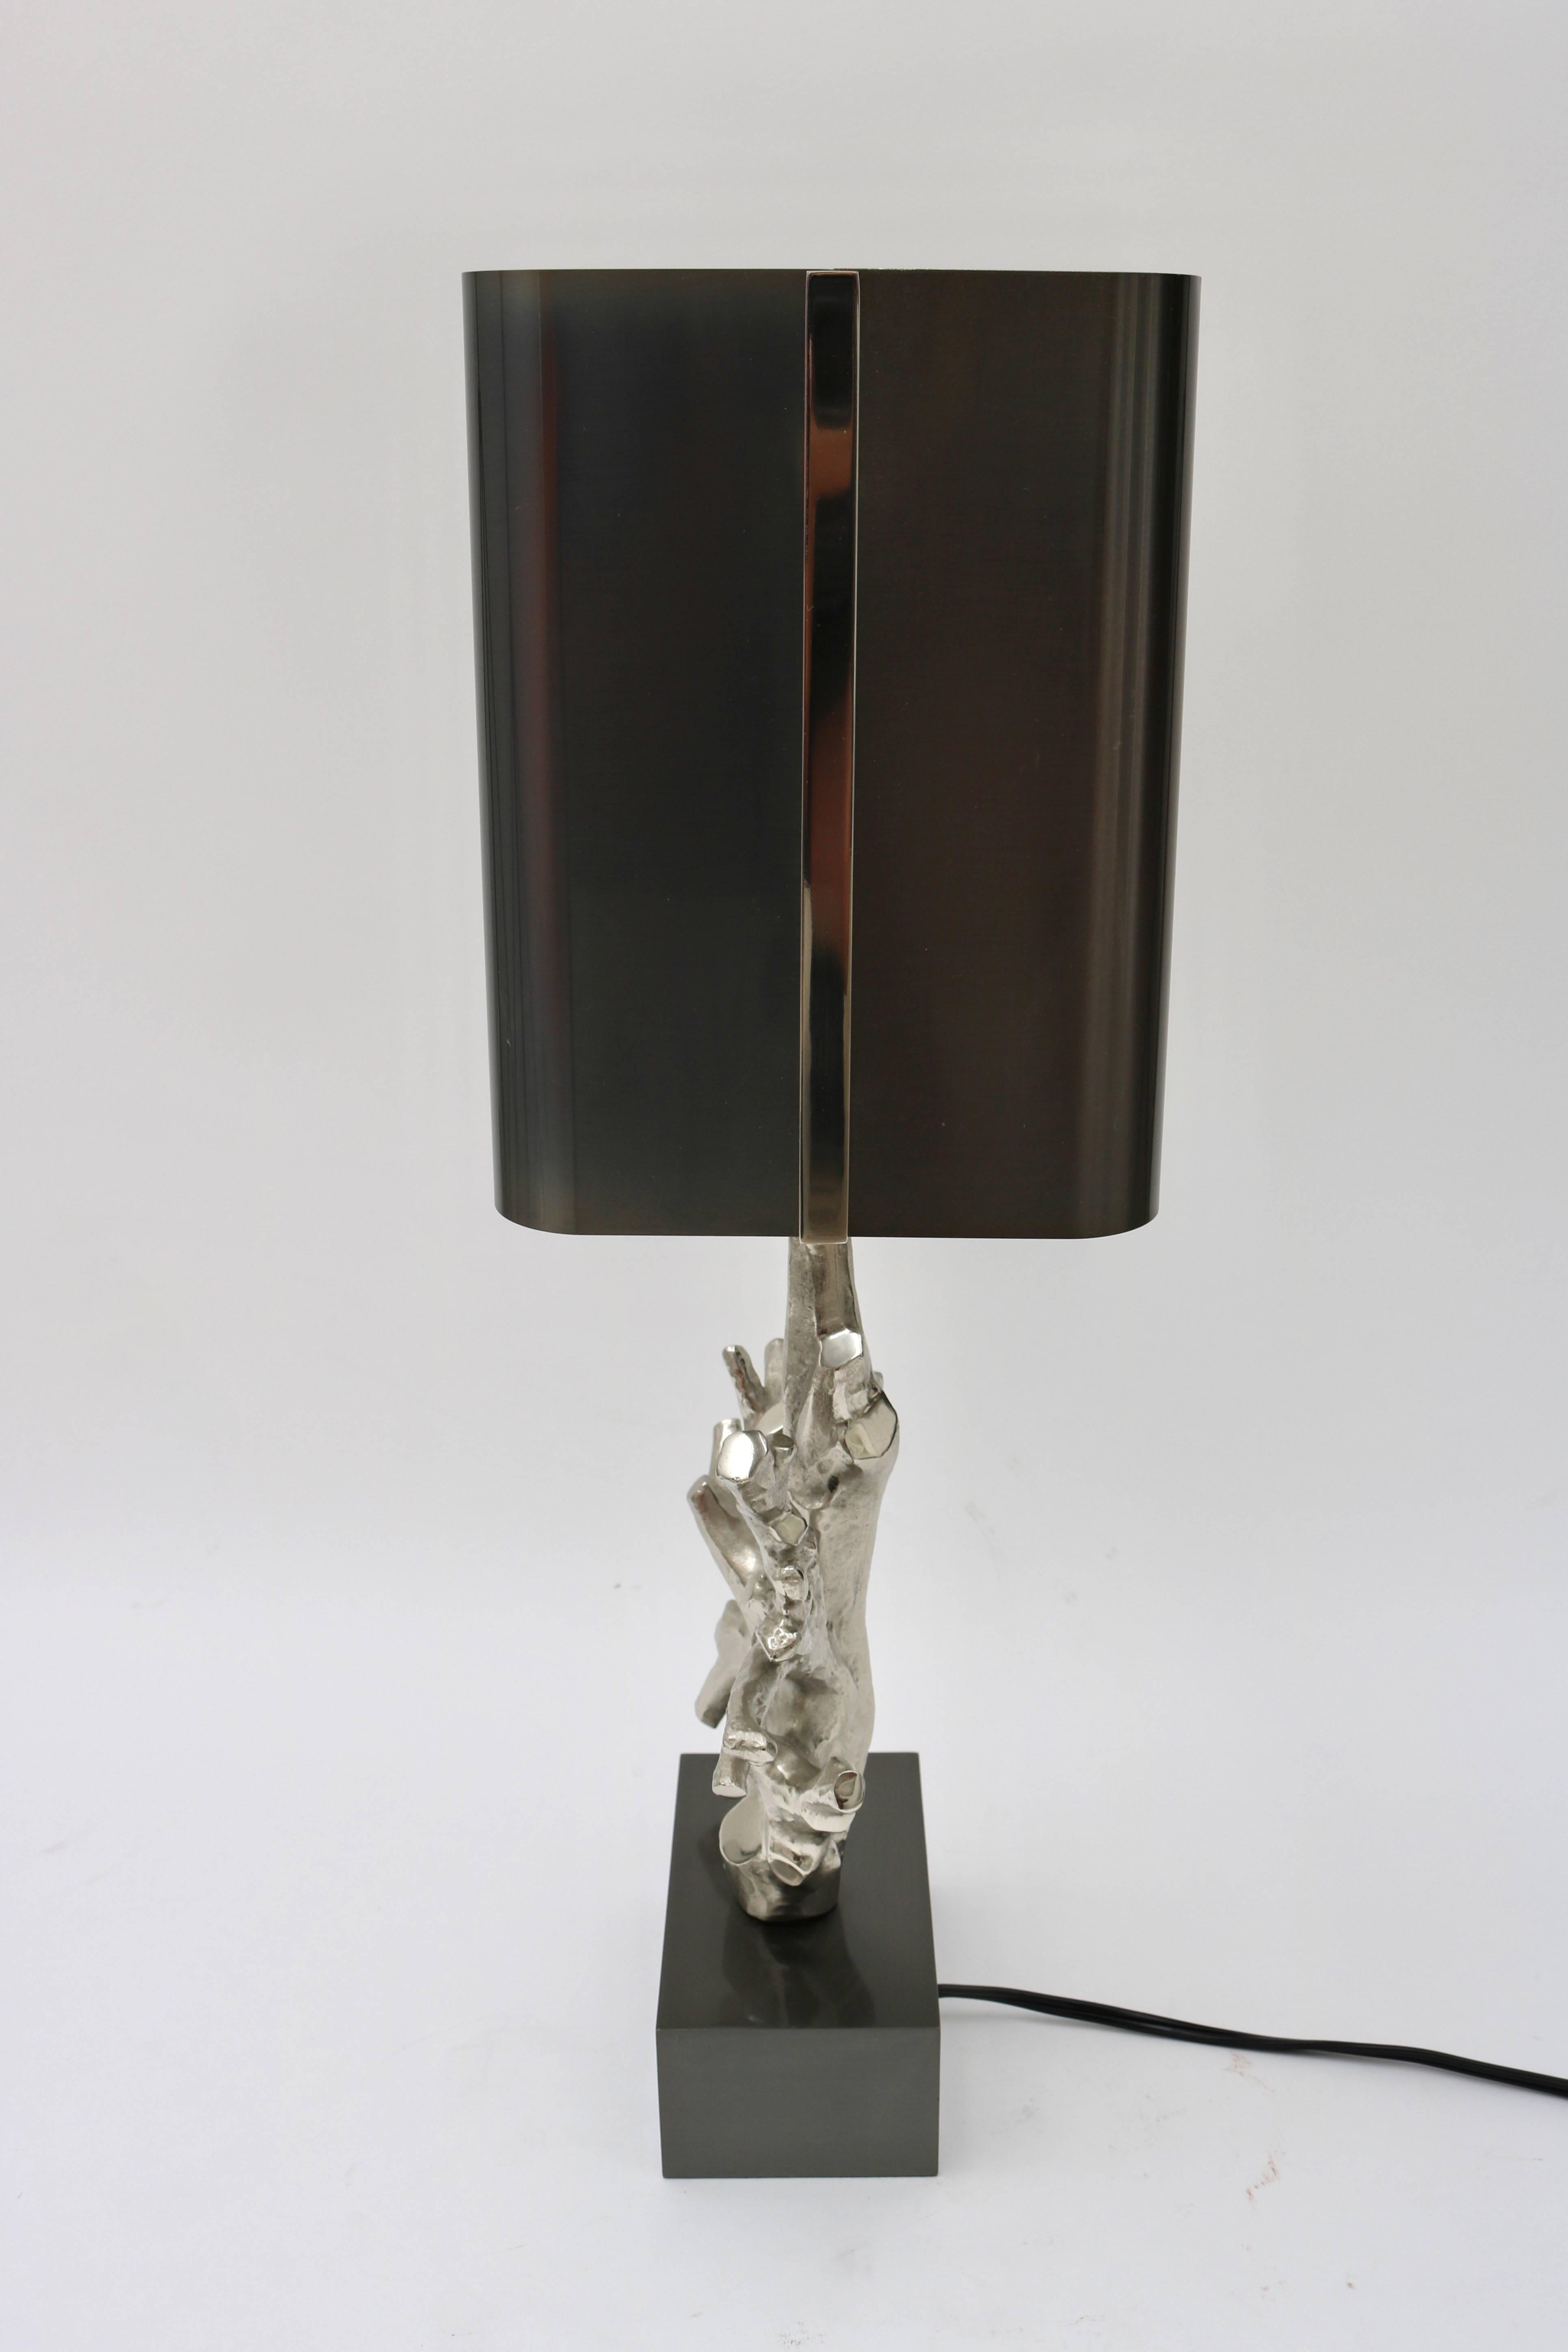 Pair of Coral-Form Table Lamps in Silver and Gunmetal Coloration 1